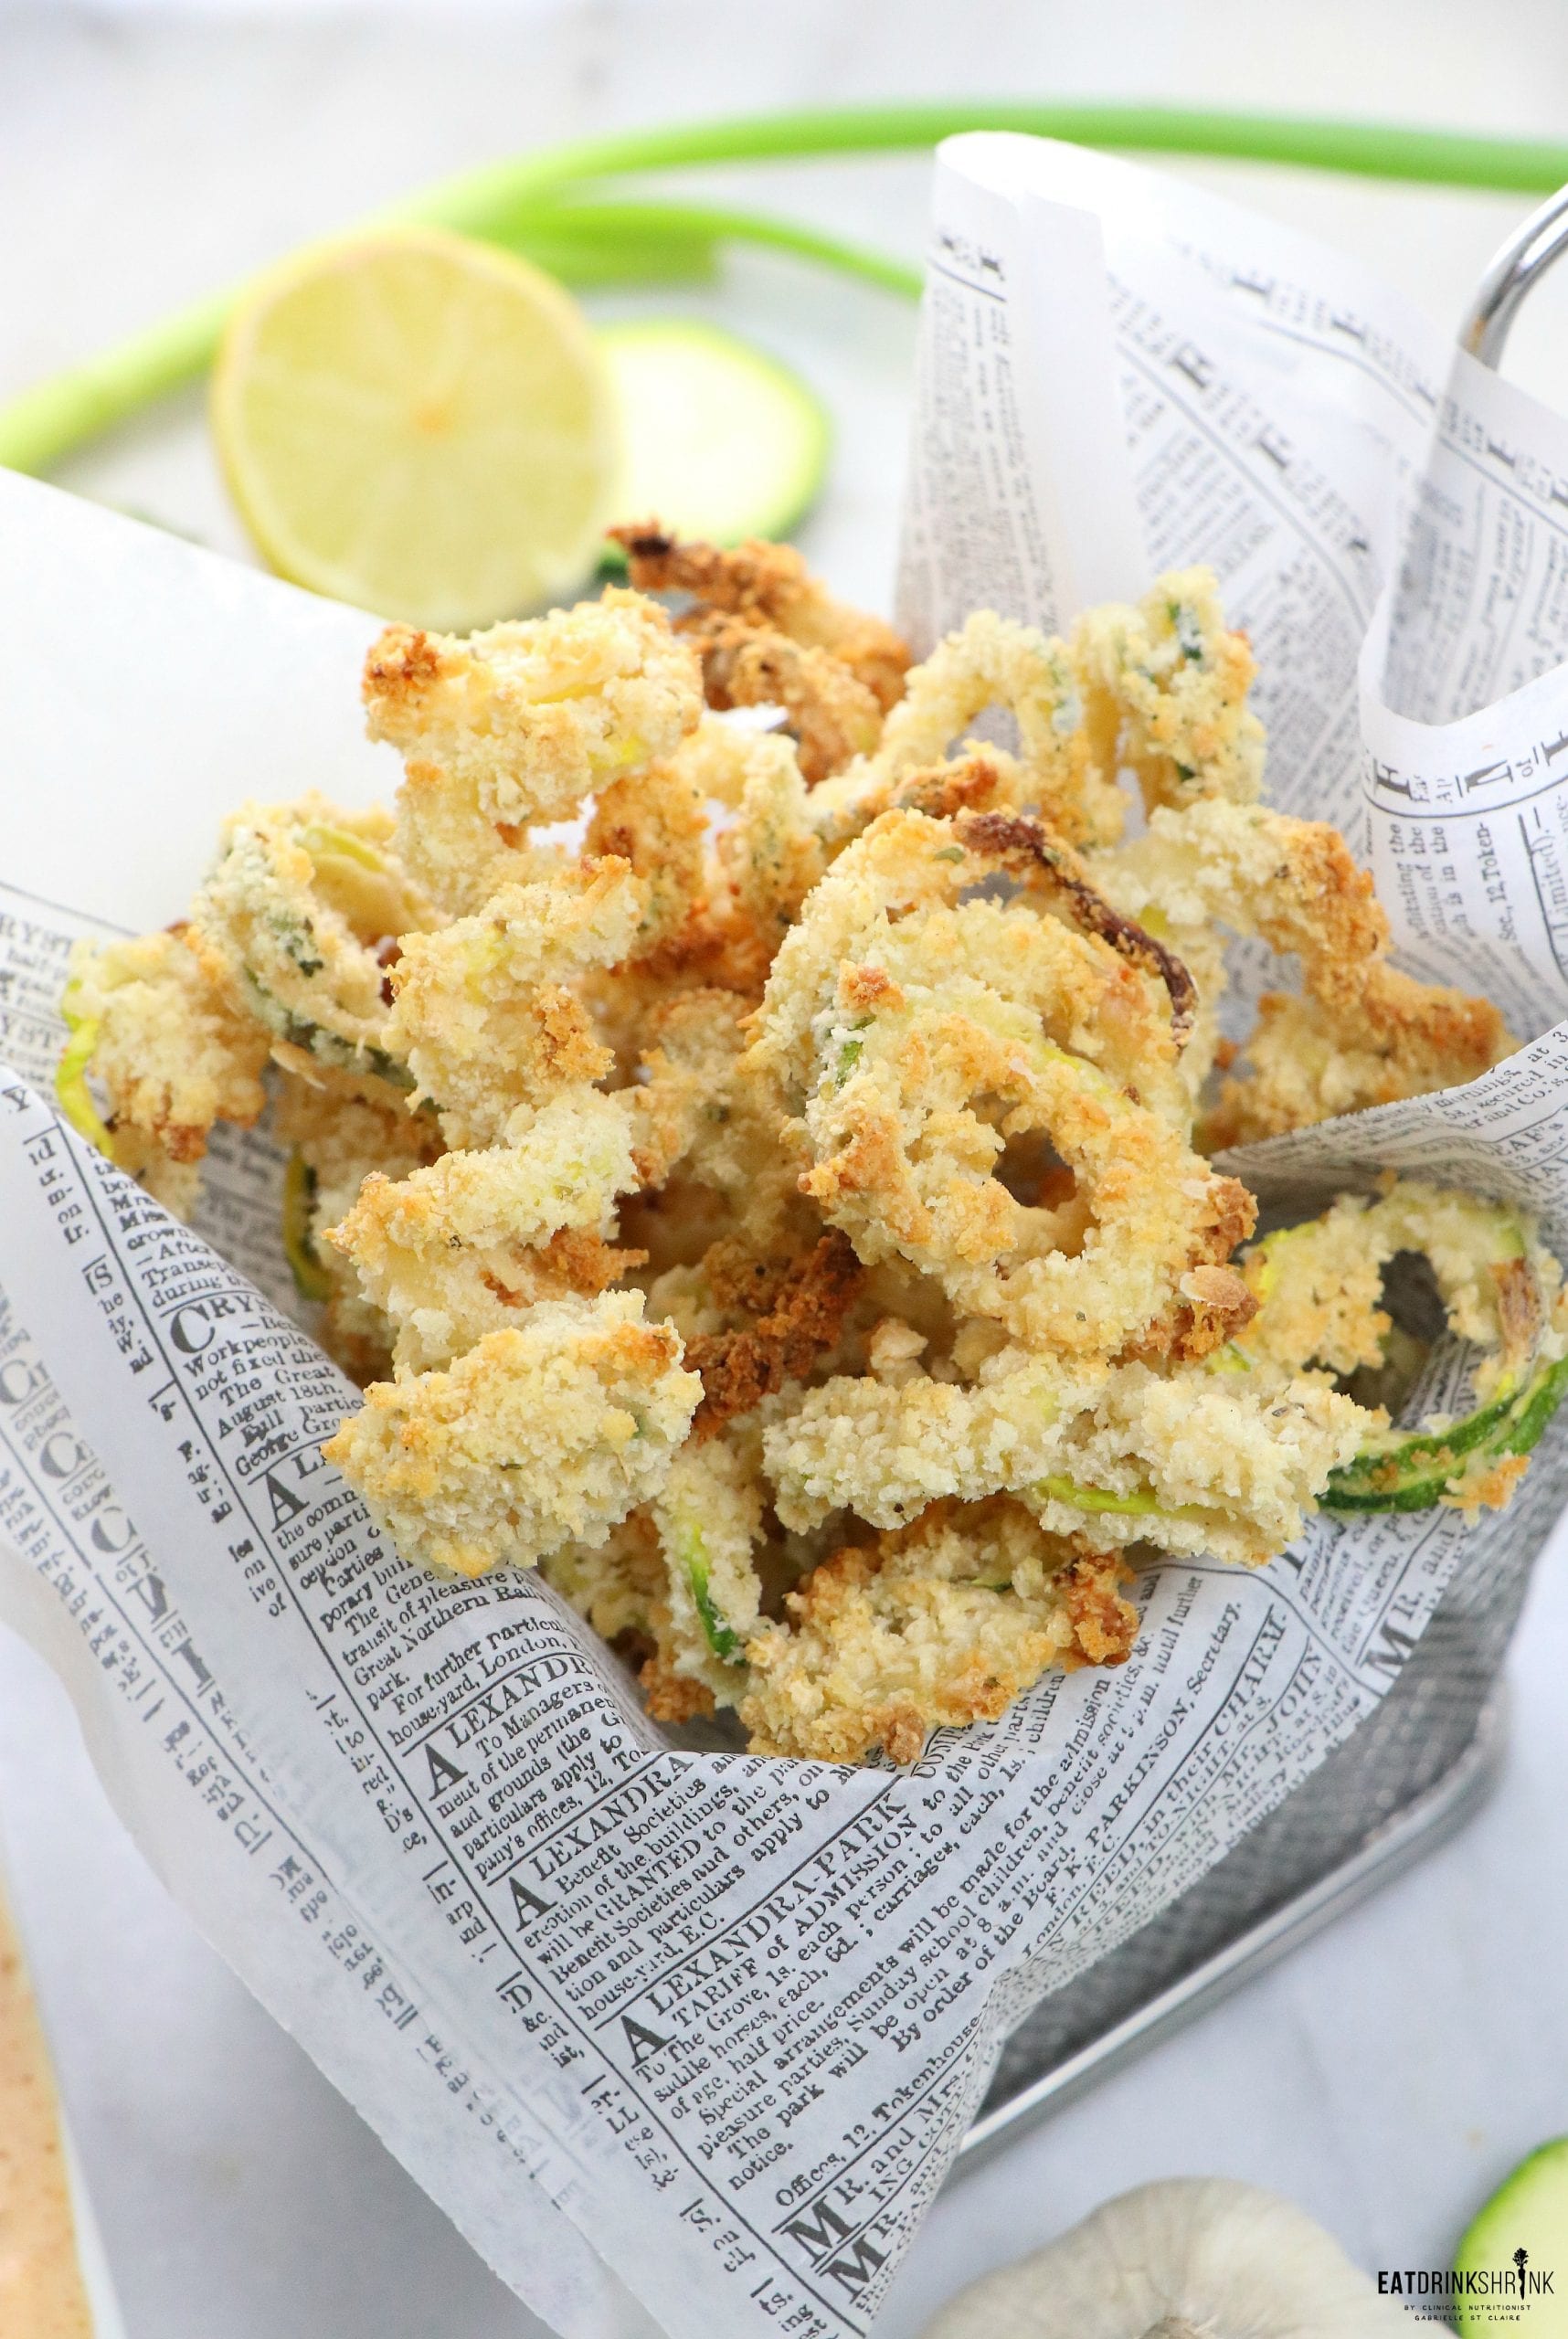 Vegan Oven Baked Zucchini Fries with Remoulade Sauce